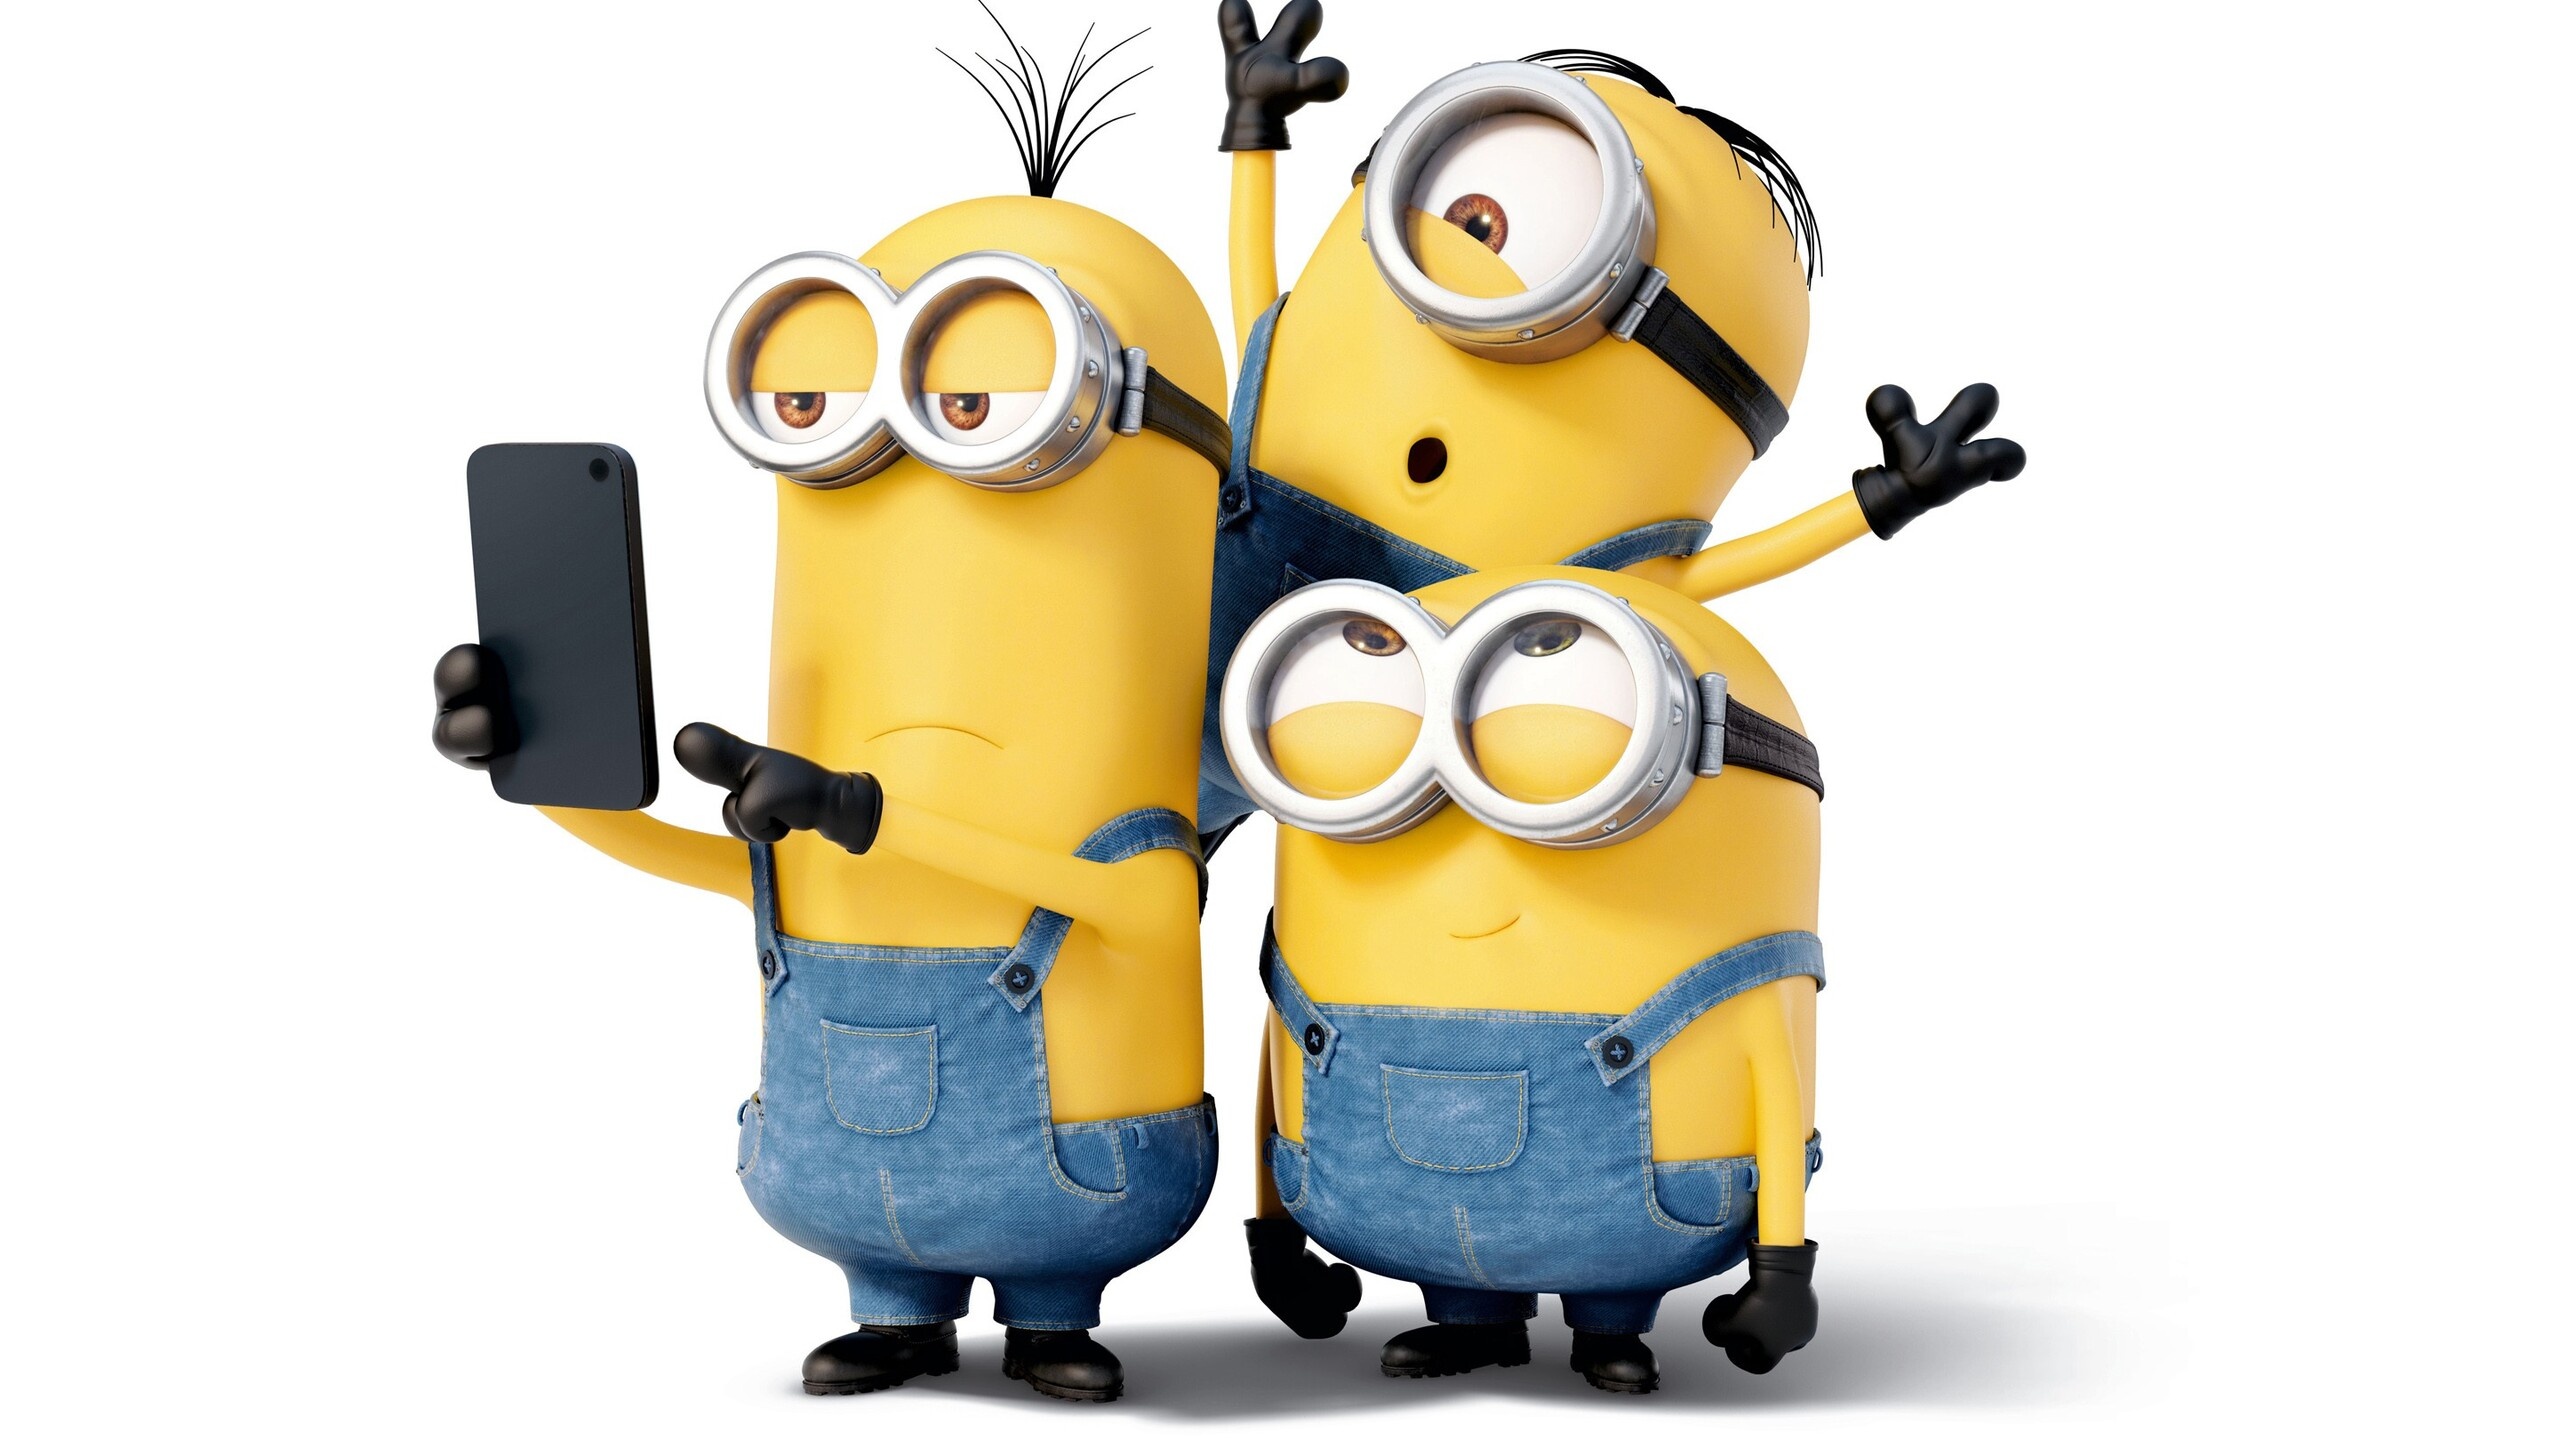 Minions animation, Latest 1440p resolution, HD 4K wallpapers, Images, 2560x1440 HD Desktop